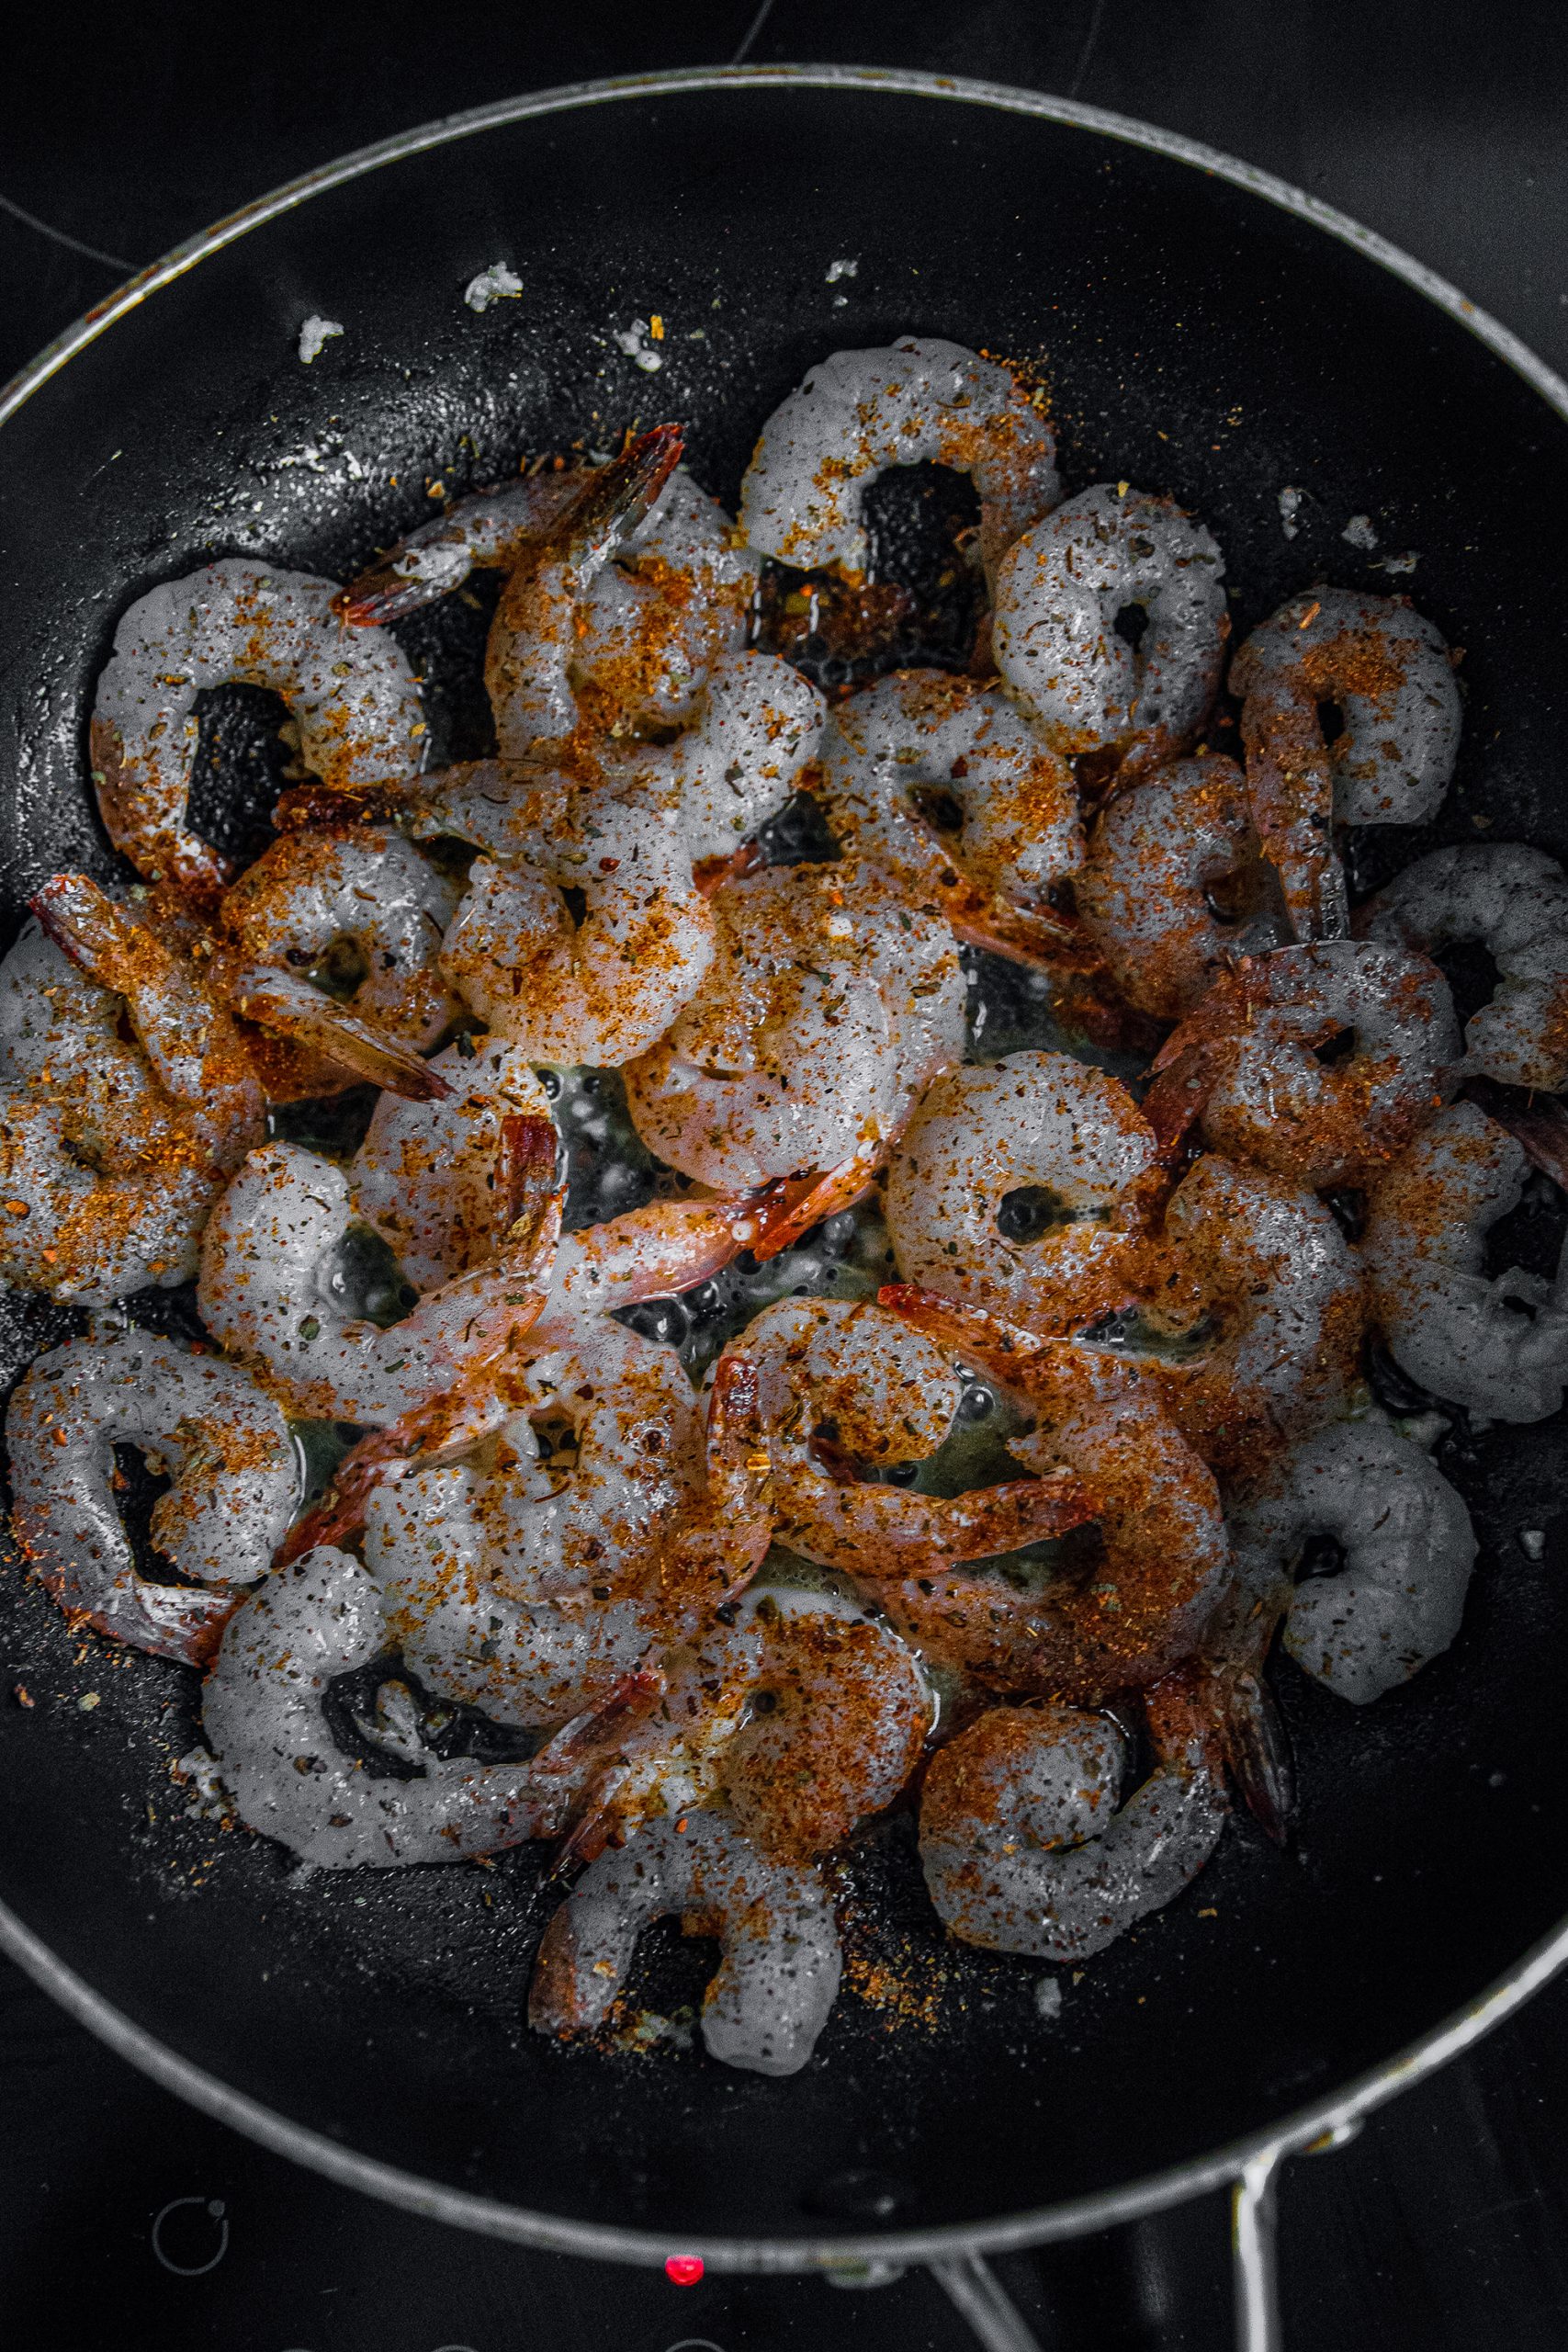 Next, season the shrimps with the Cajun seasoning., be generous (to your liking)!